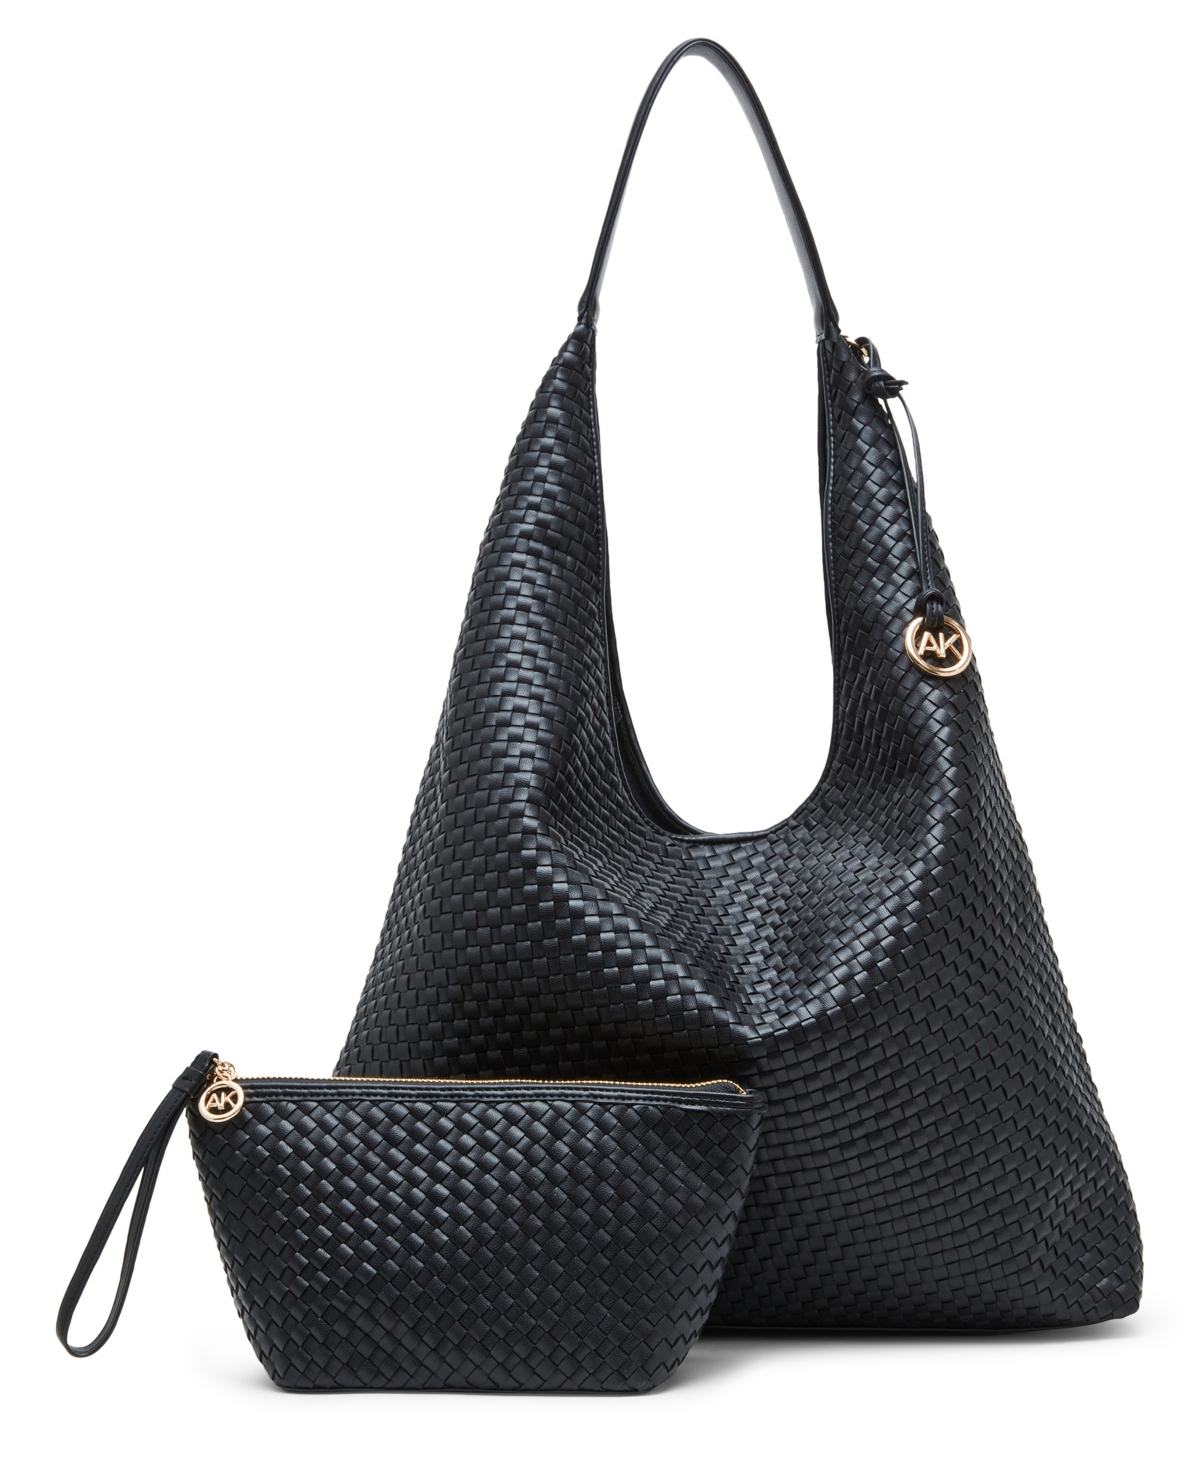 Women's Large Woven Hobo With Pouch Handbag - Black